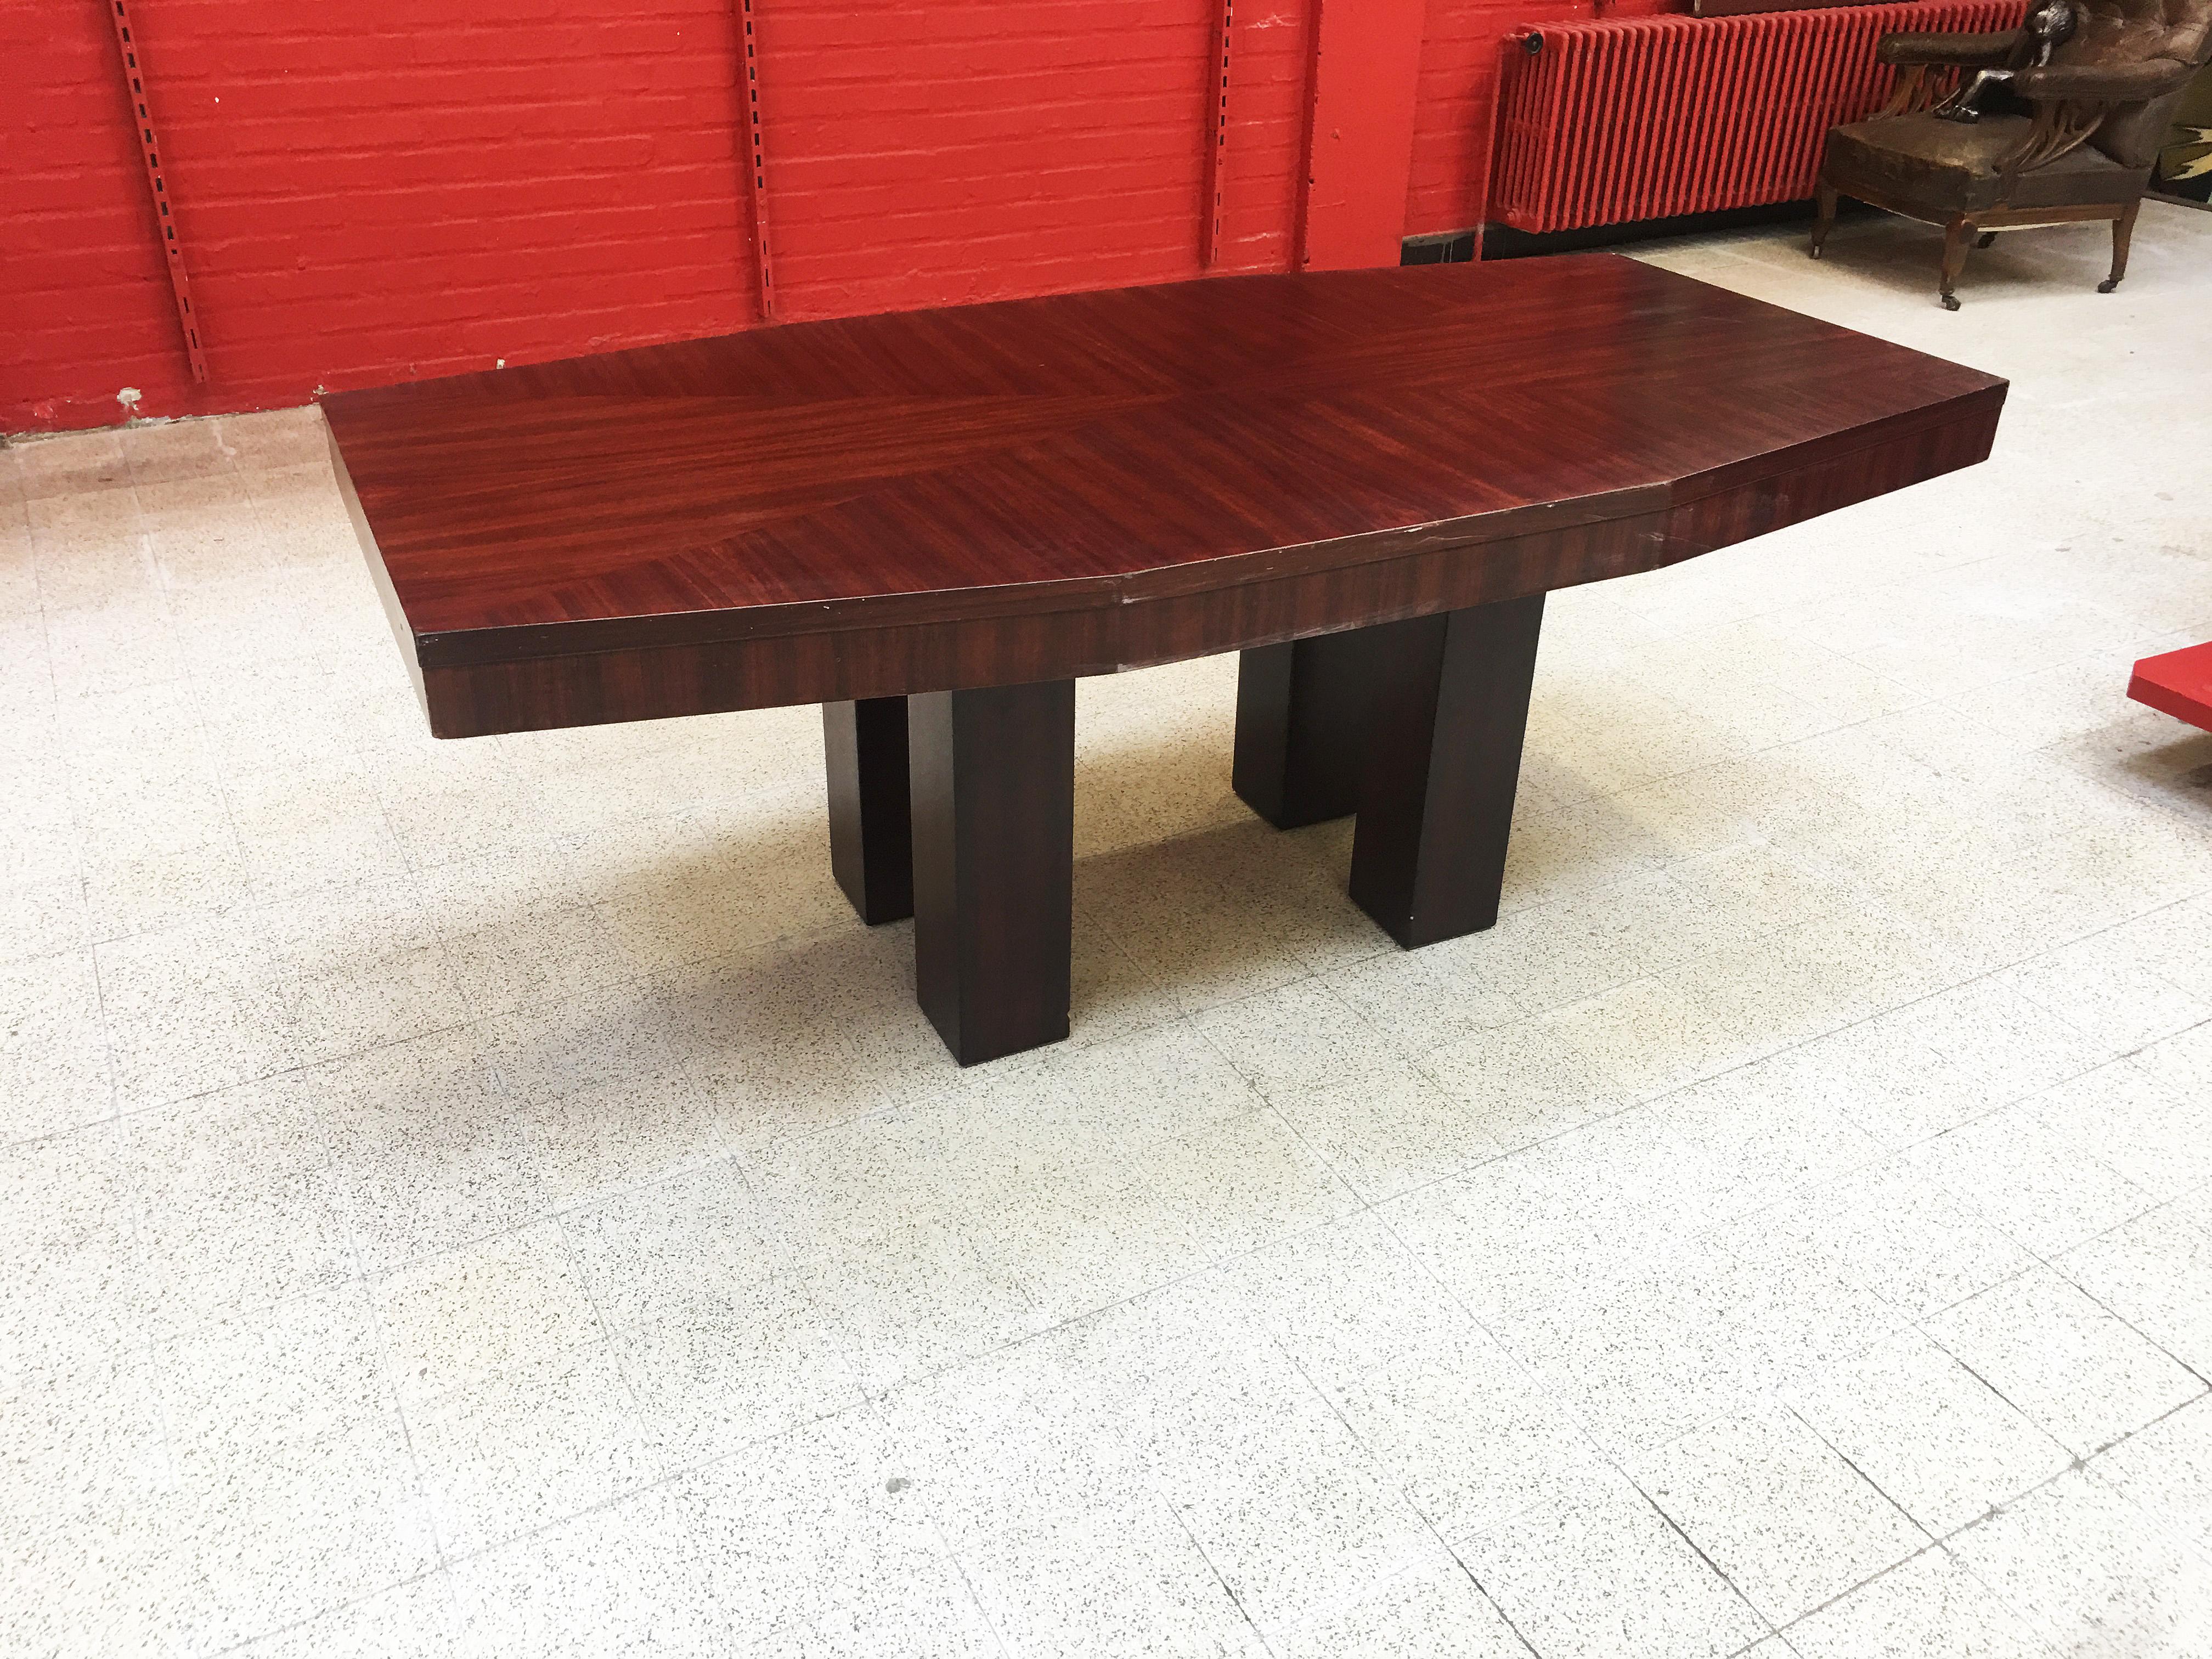 Modernist Art Deco Table circa 1930-1940 Attributed to Jacques Adnet For Sale 1